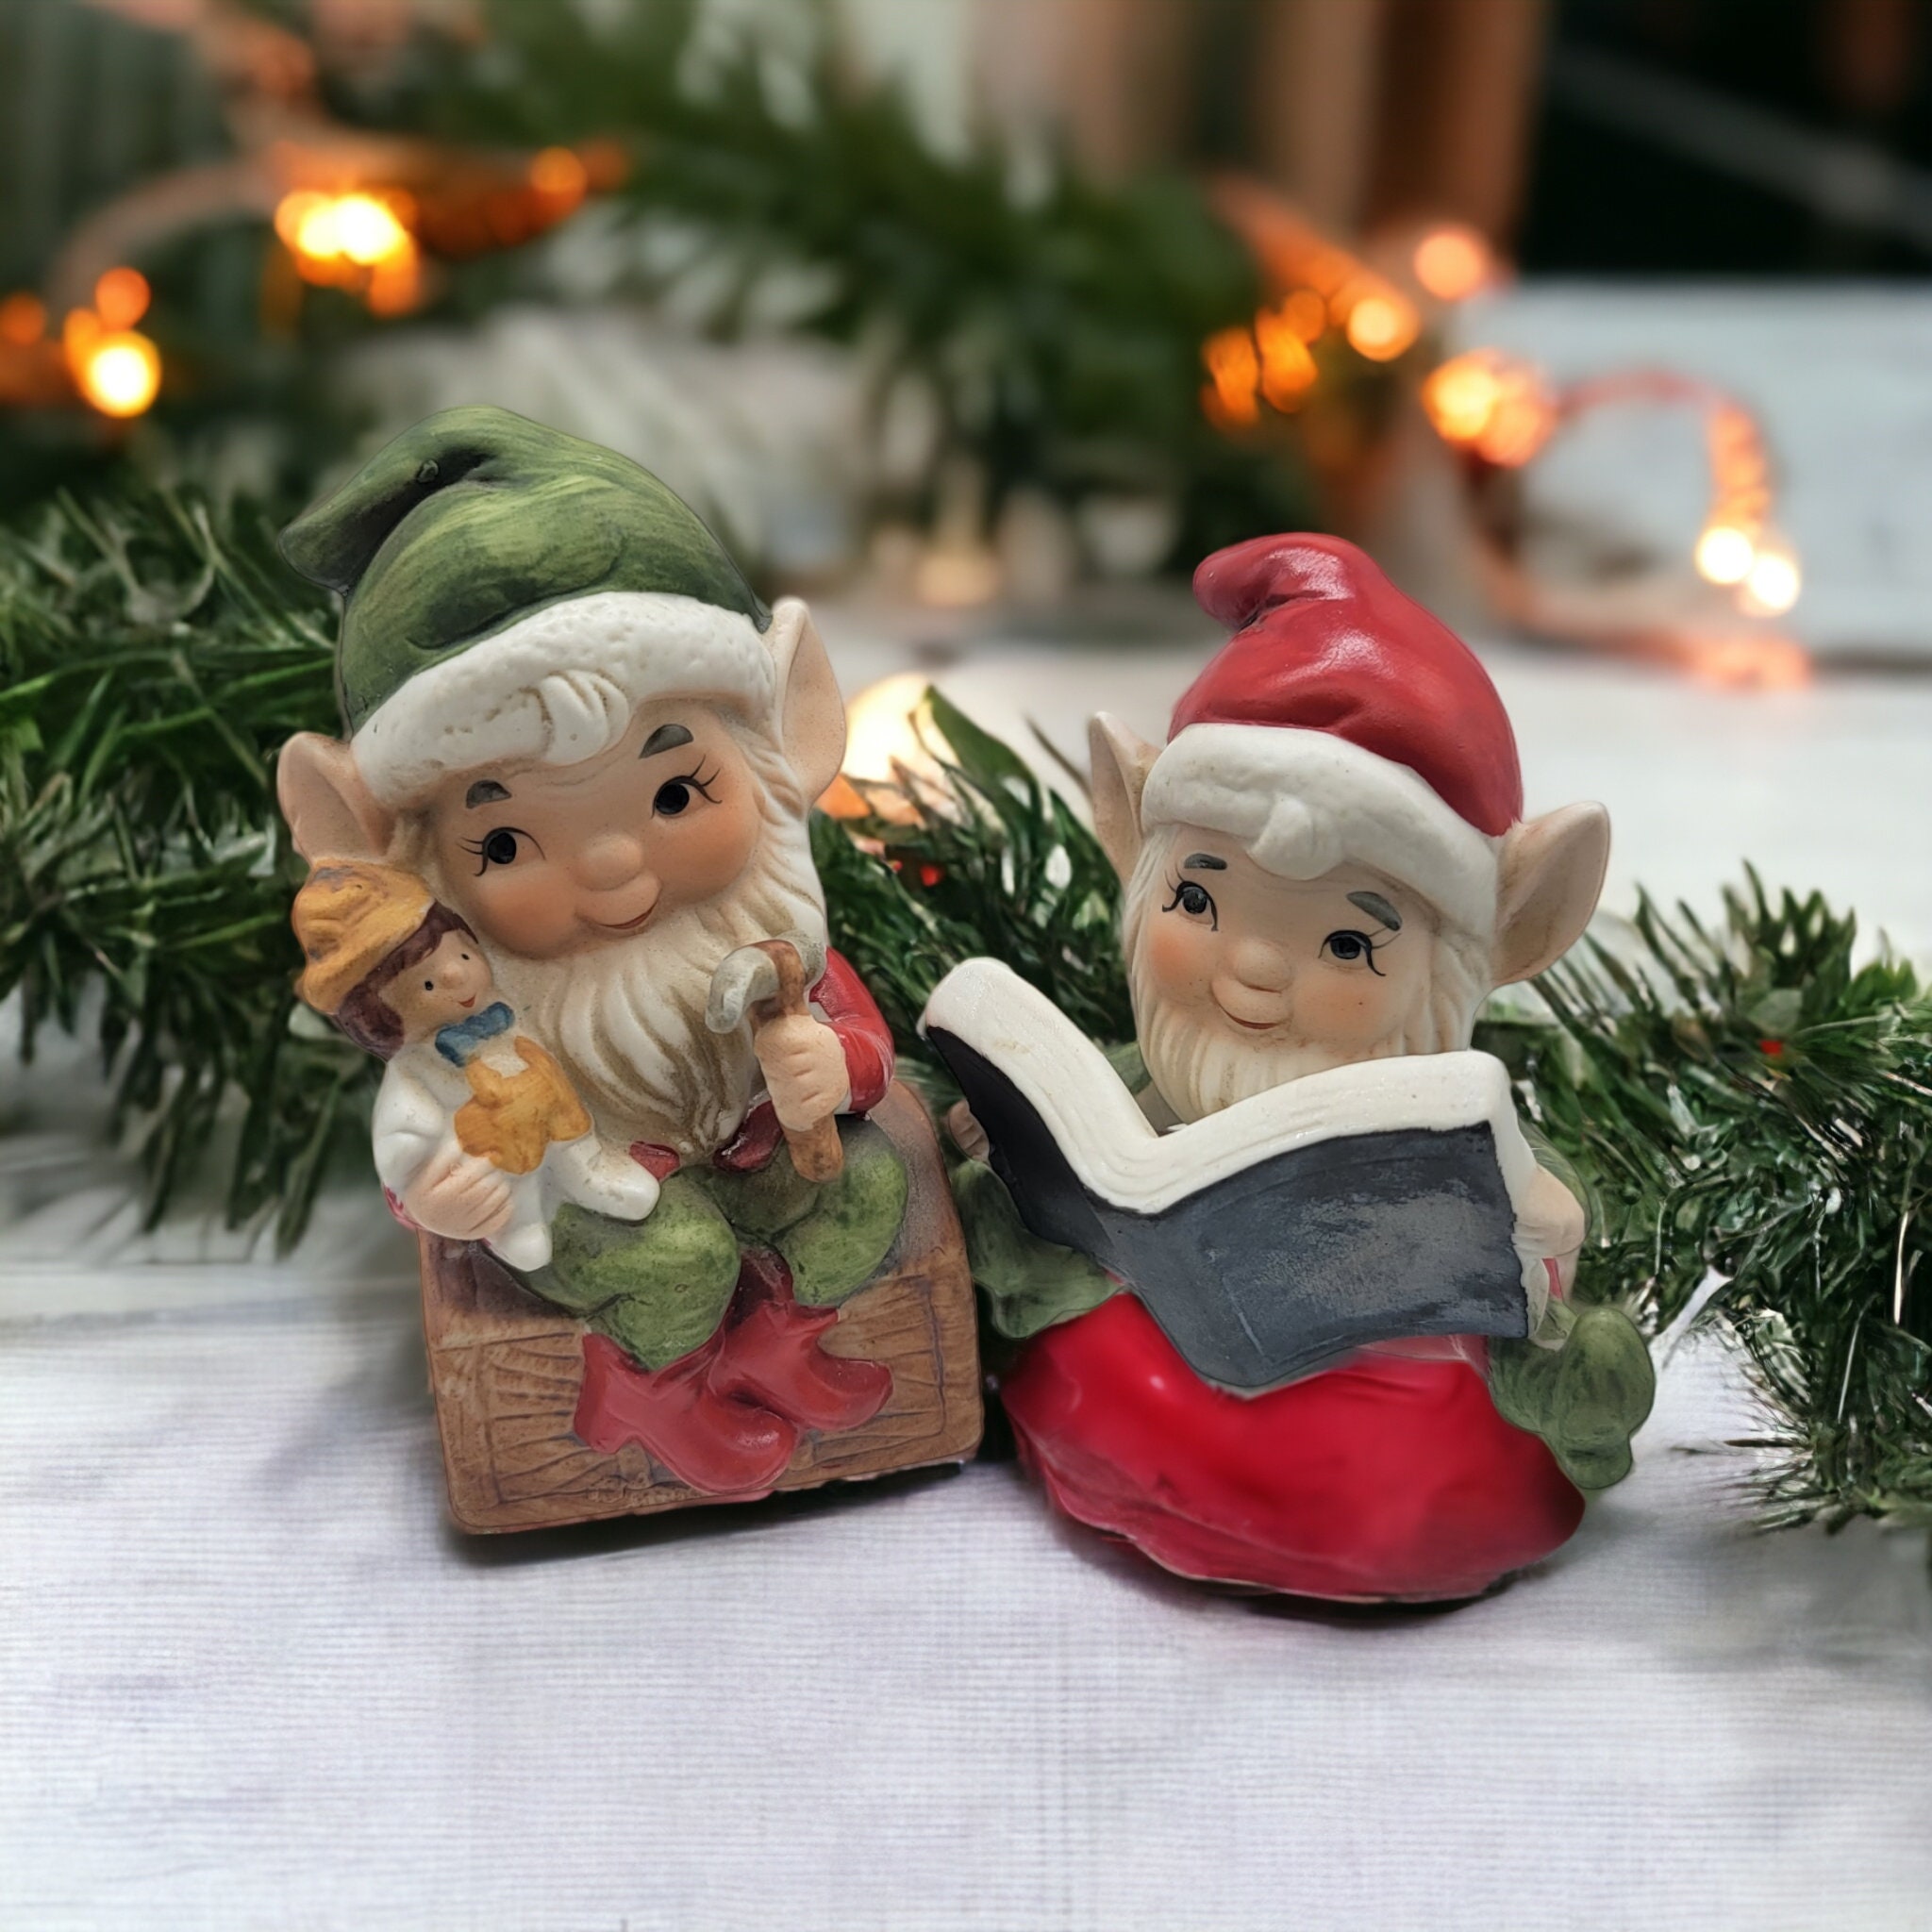 Elf Christmas Figurines. Set of Two Homko Hand Painted Porcelain